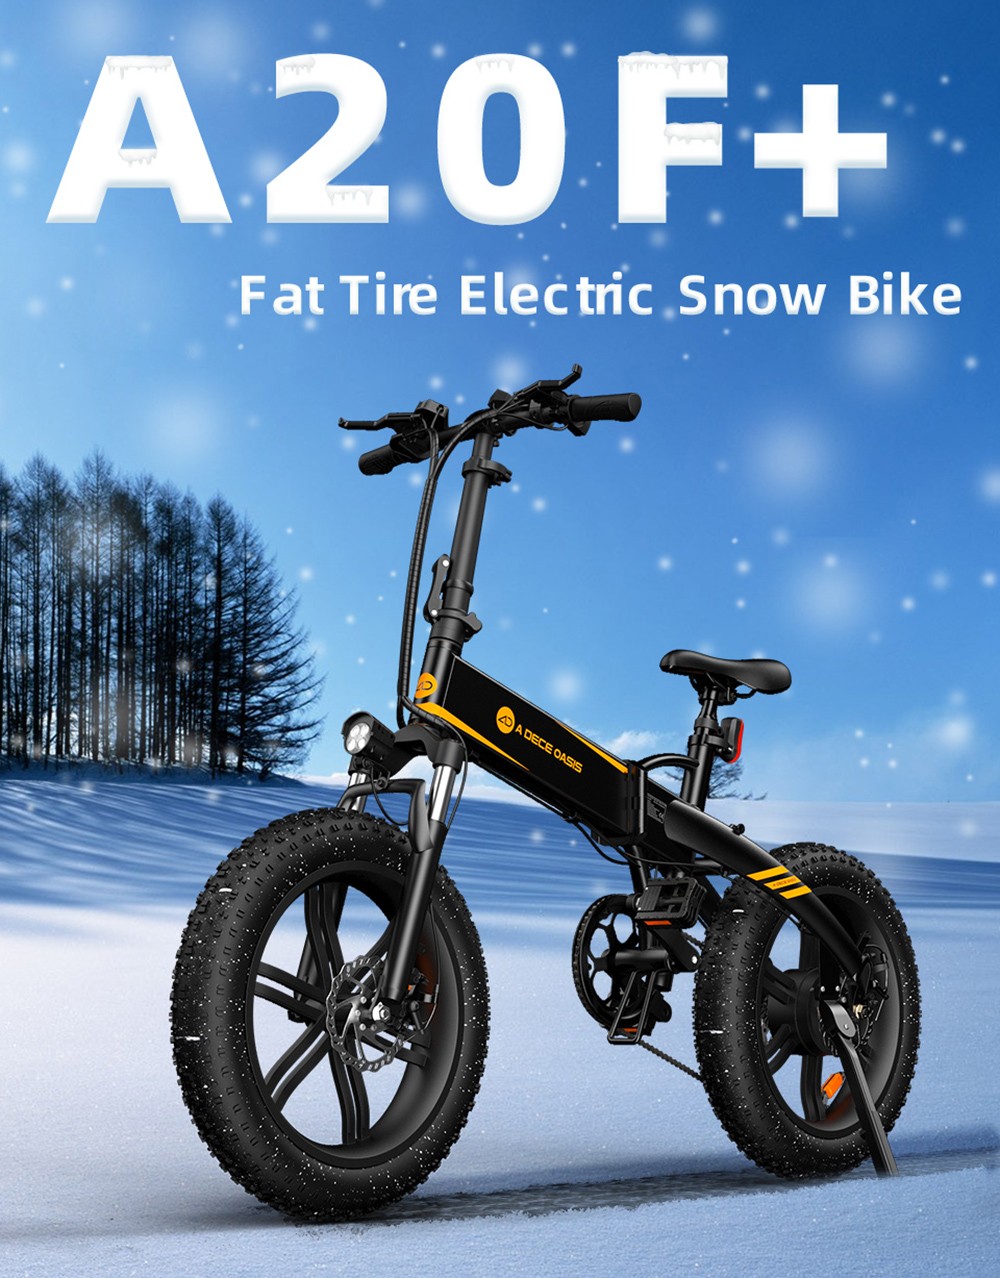 ADO A20F+ Off-road Electric Folding Bike 20*4.0 inch 500W Brushless DC Motor SHIMANO 7-Speed Rear Derailleur 36V 10.4Ah Removable Battery 35km/h Max speed Pure power up to 50km Range Aluminum alloy Frame - Black